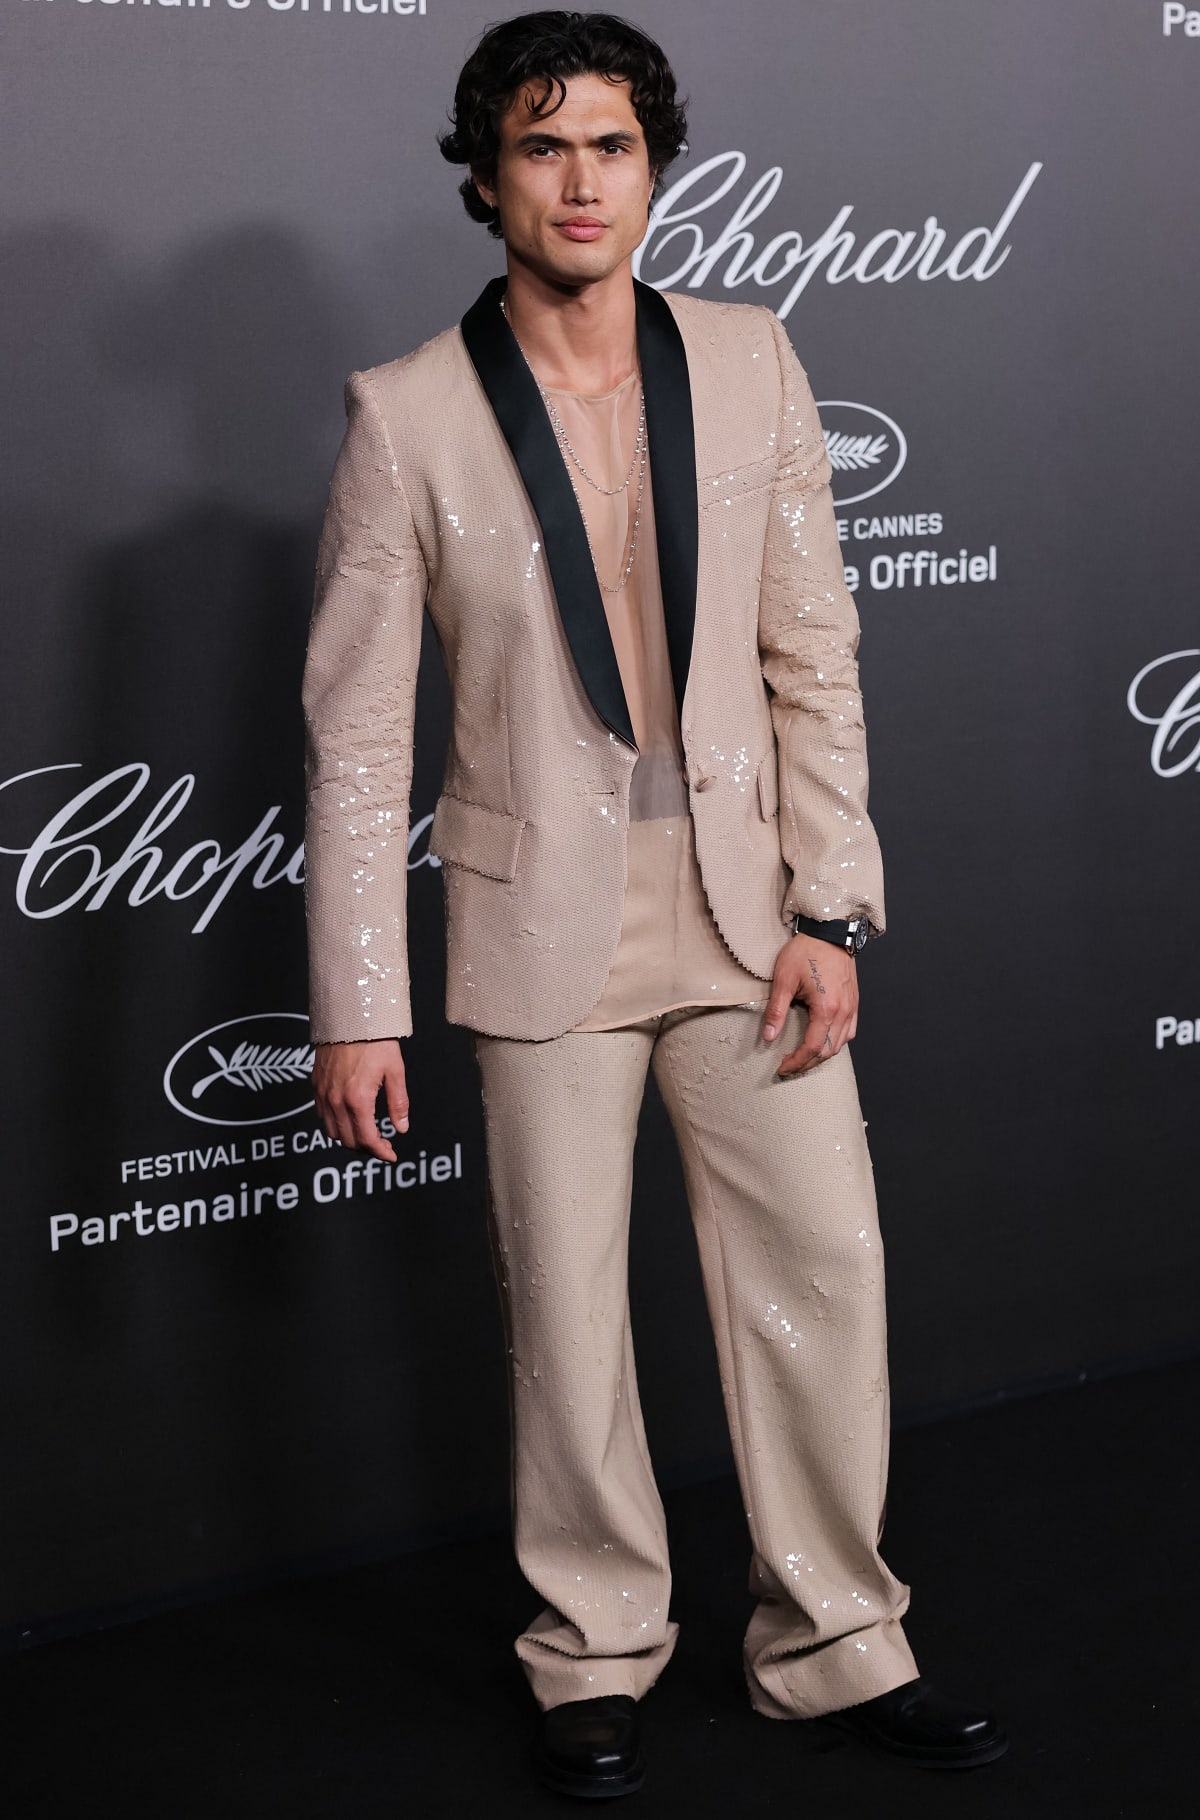 Charles Melton has an impressive height of 5 feet and 11 ¼ inches, and he has a $7 million net worth